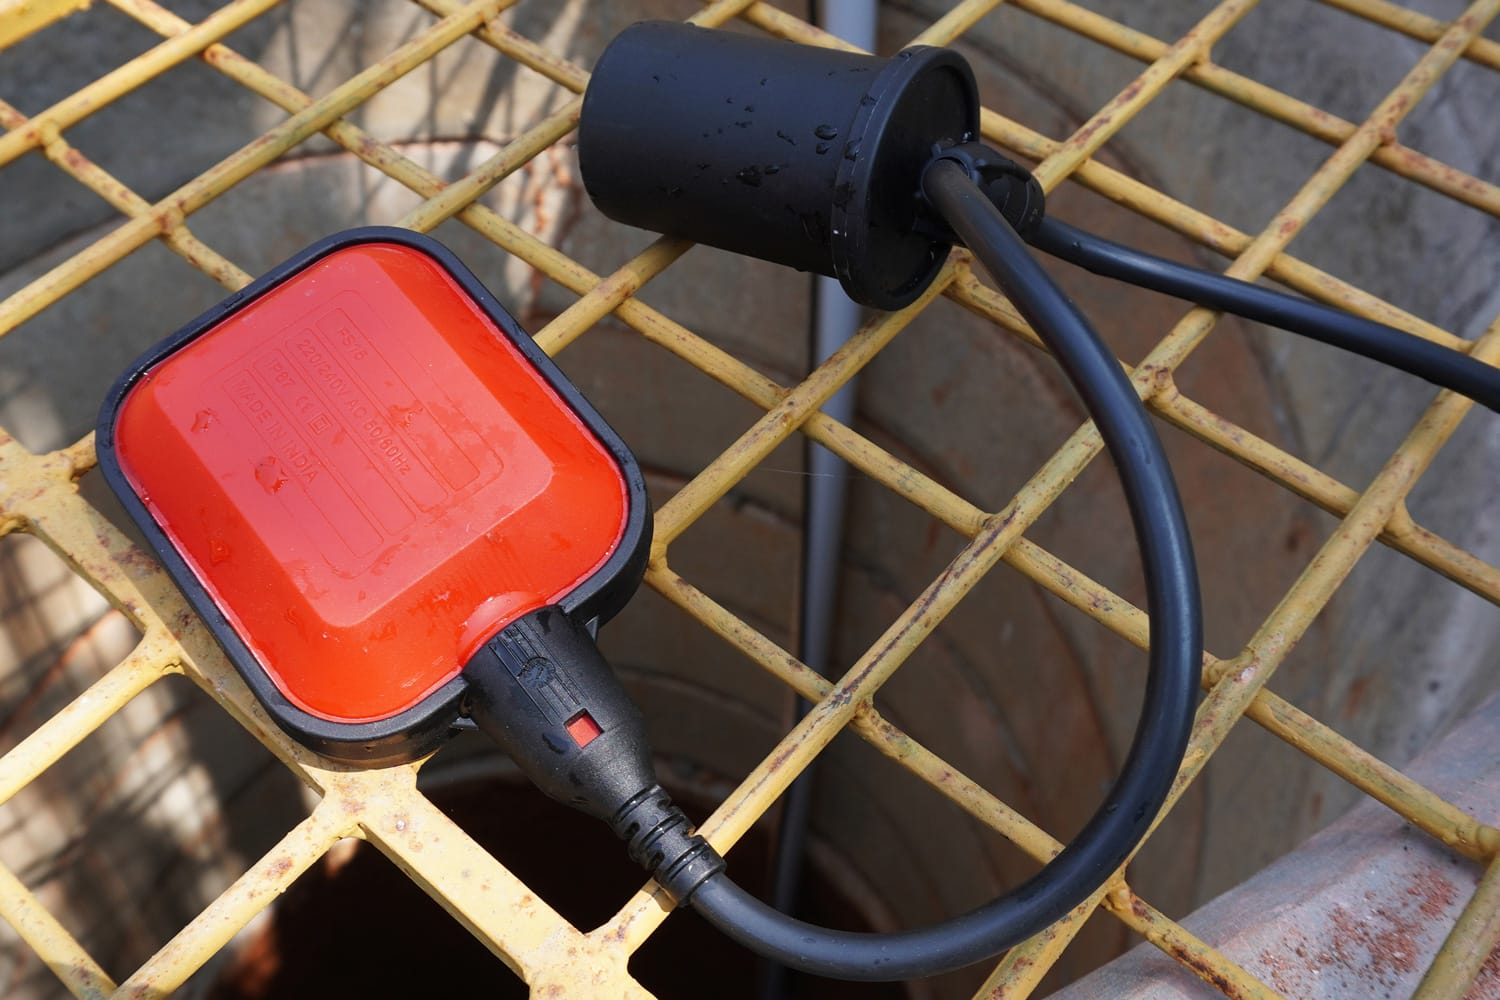 A float switch, a device used to detect the level of water in a tank. Water level sensor kept of the wire mesh over a well, flat lay image.